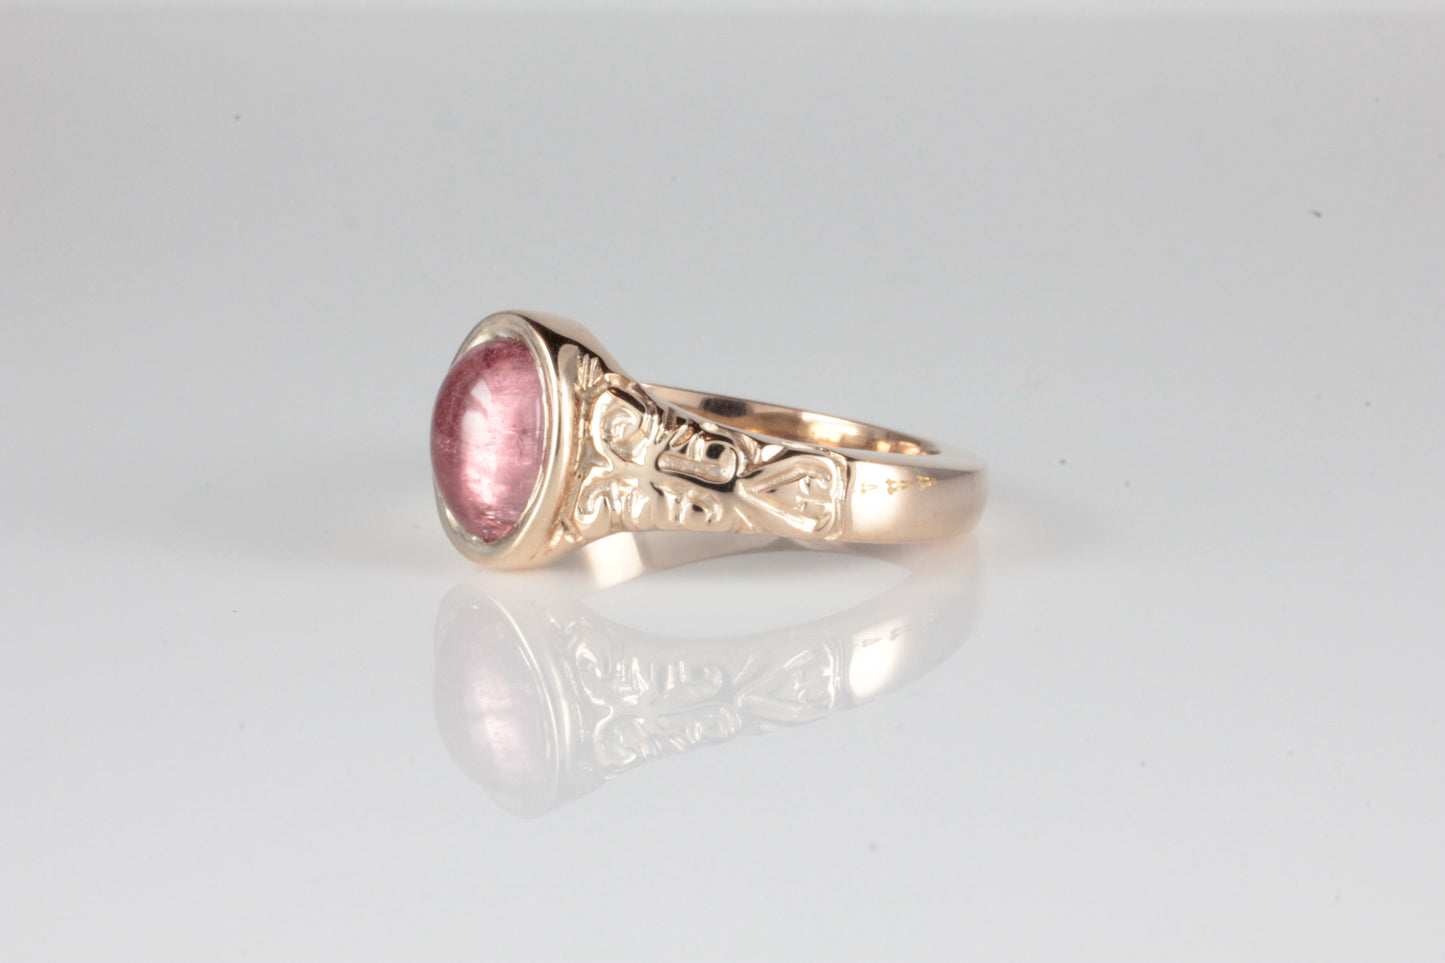 'Sostra' Victorian style Oval Pink Tourmaline Cabochon Ring